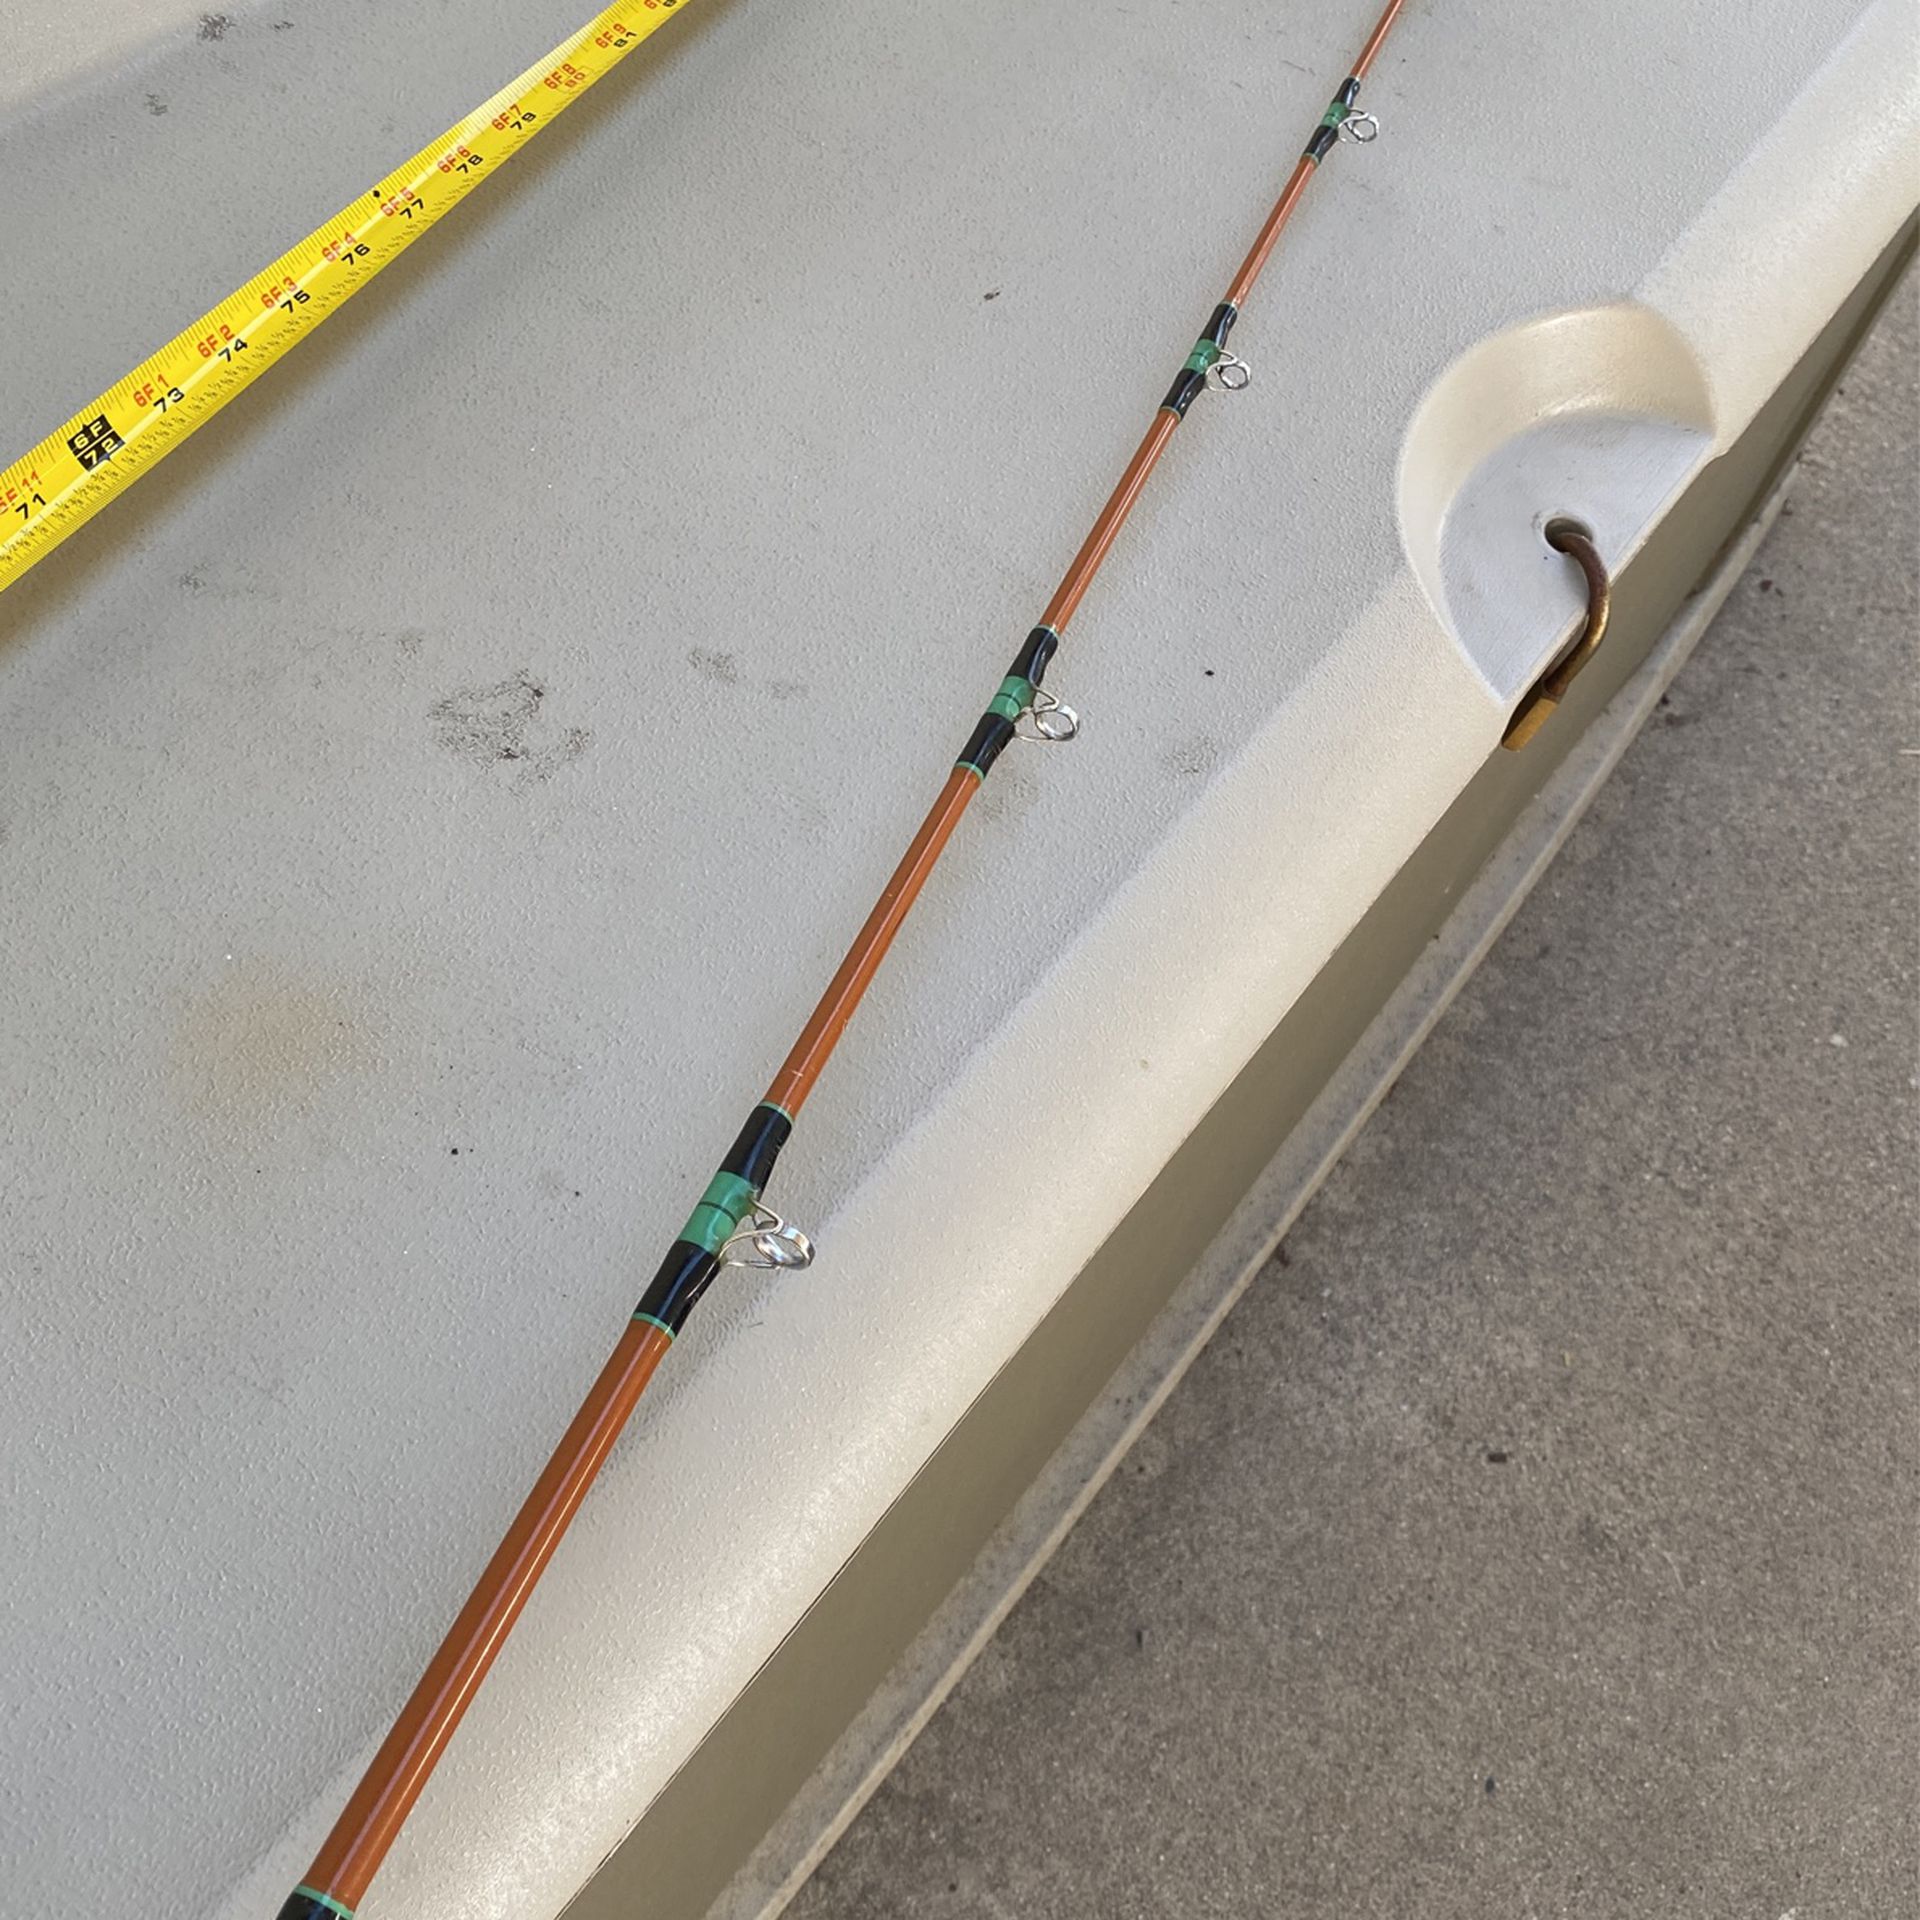 Used Calstar Wc-196-6s 10-25 Spinning Fishing Rod 6', 40% OFF